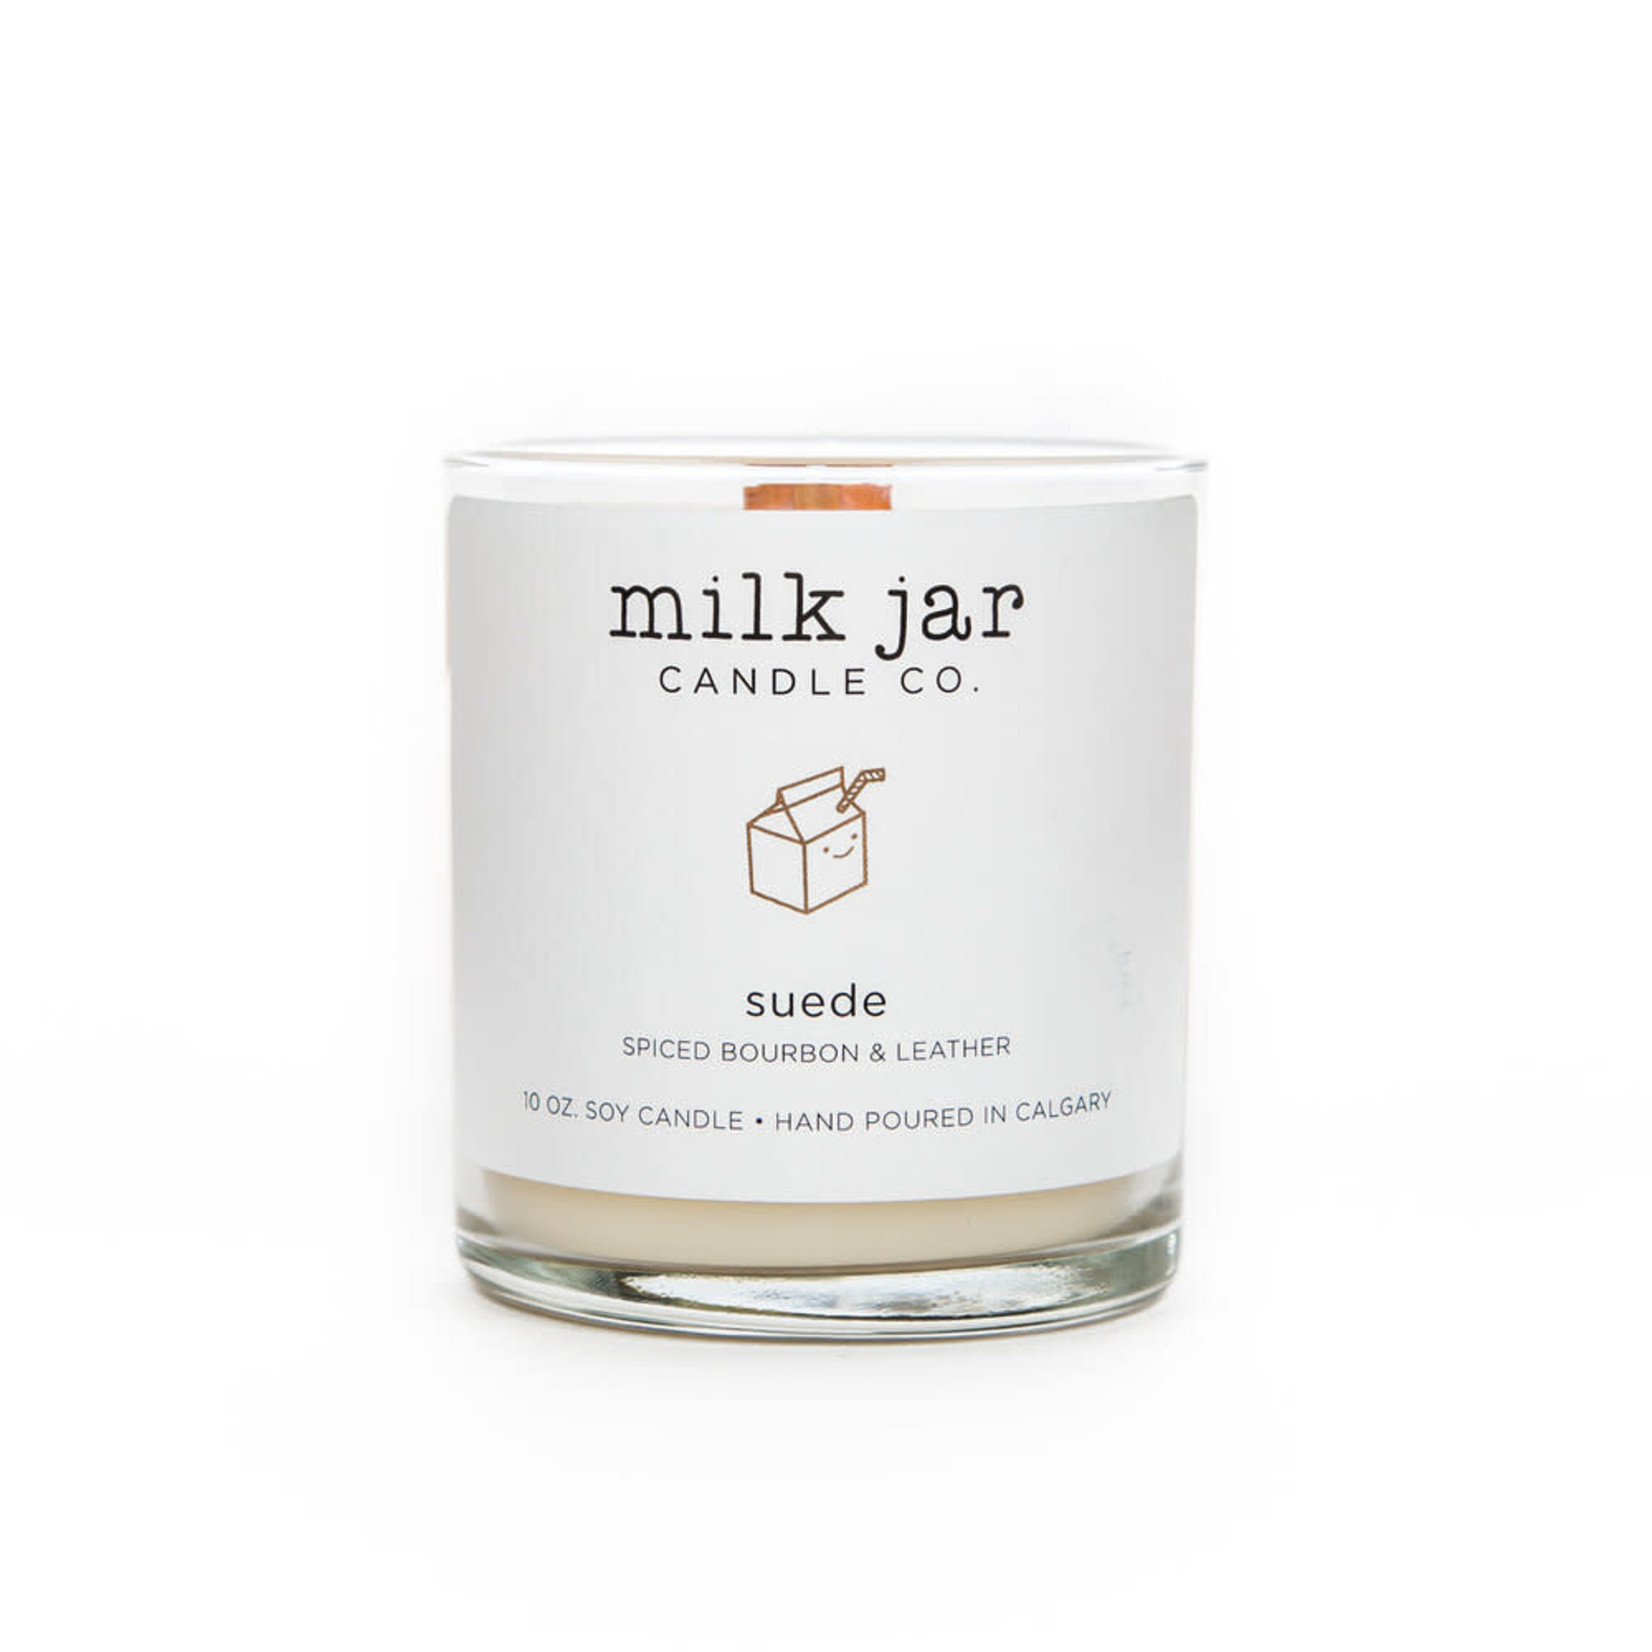 Milk Jar Candle Co. Suede Candle